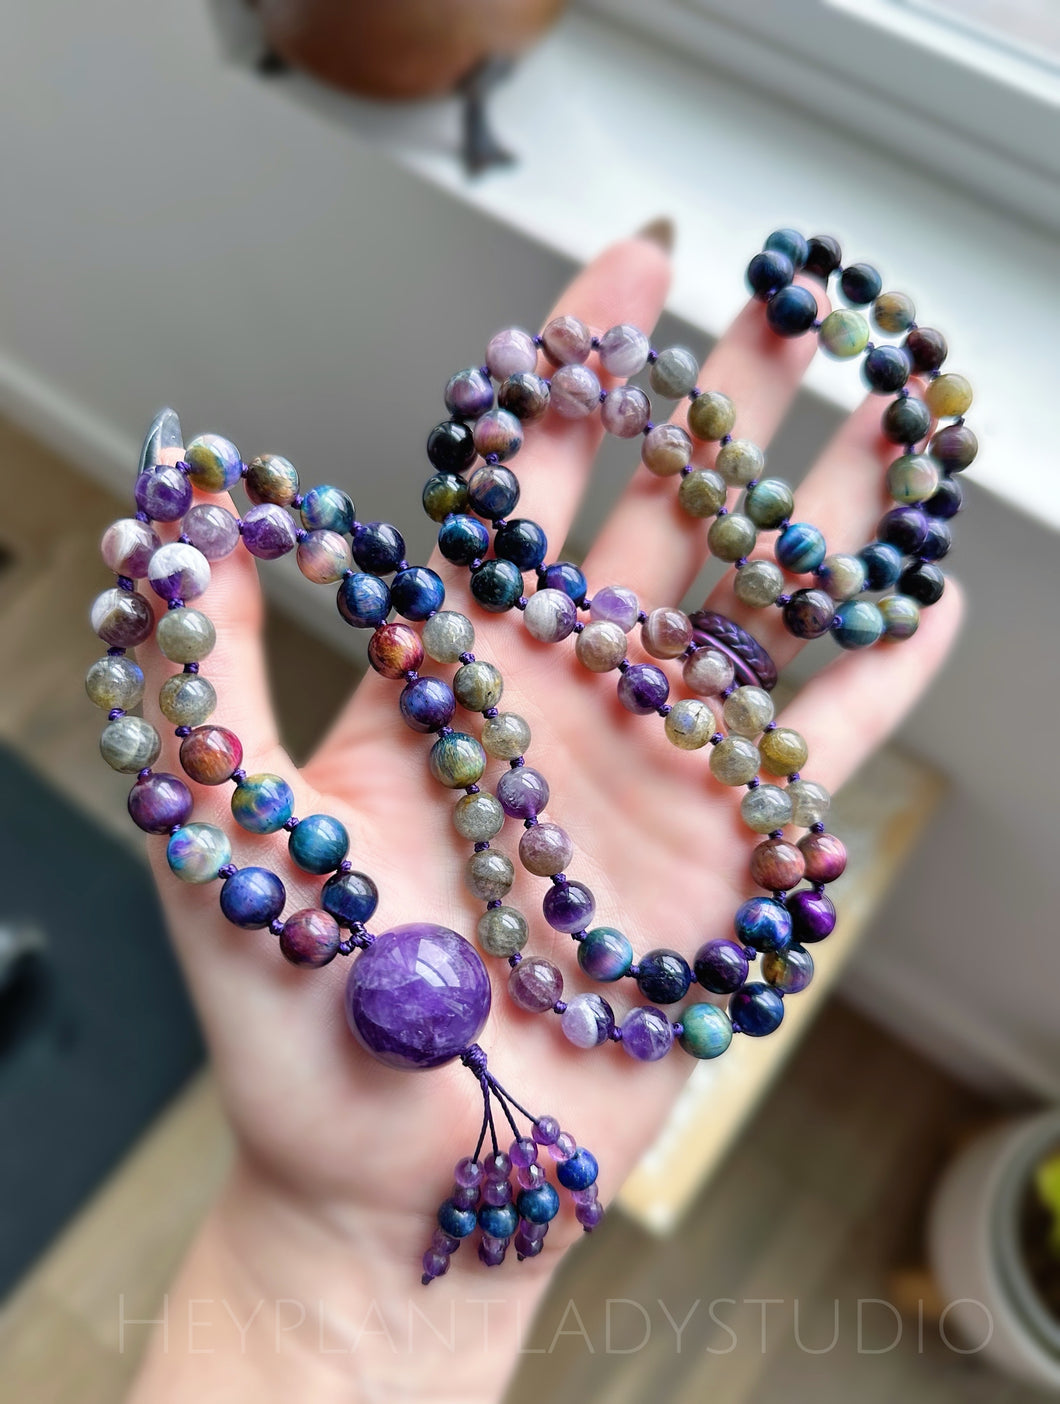 Connected with the Universe - 108 Gemstone Meditation Beads - Amethyst Focal